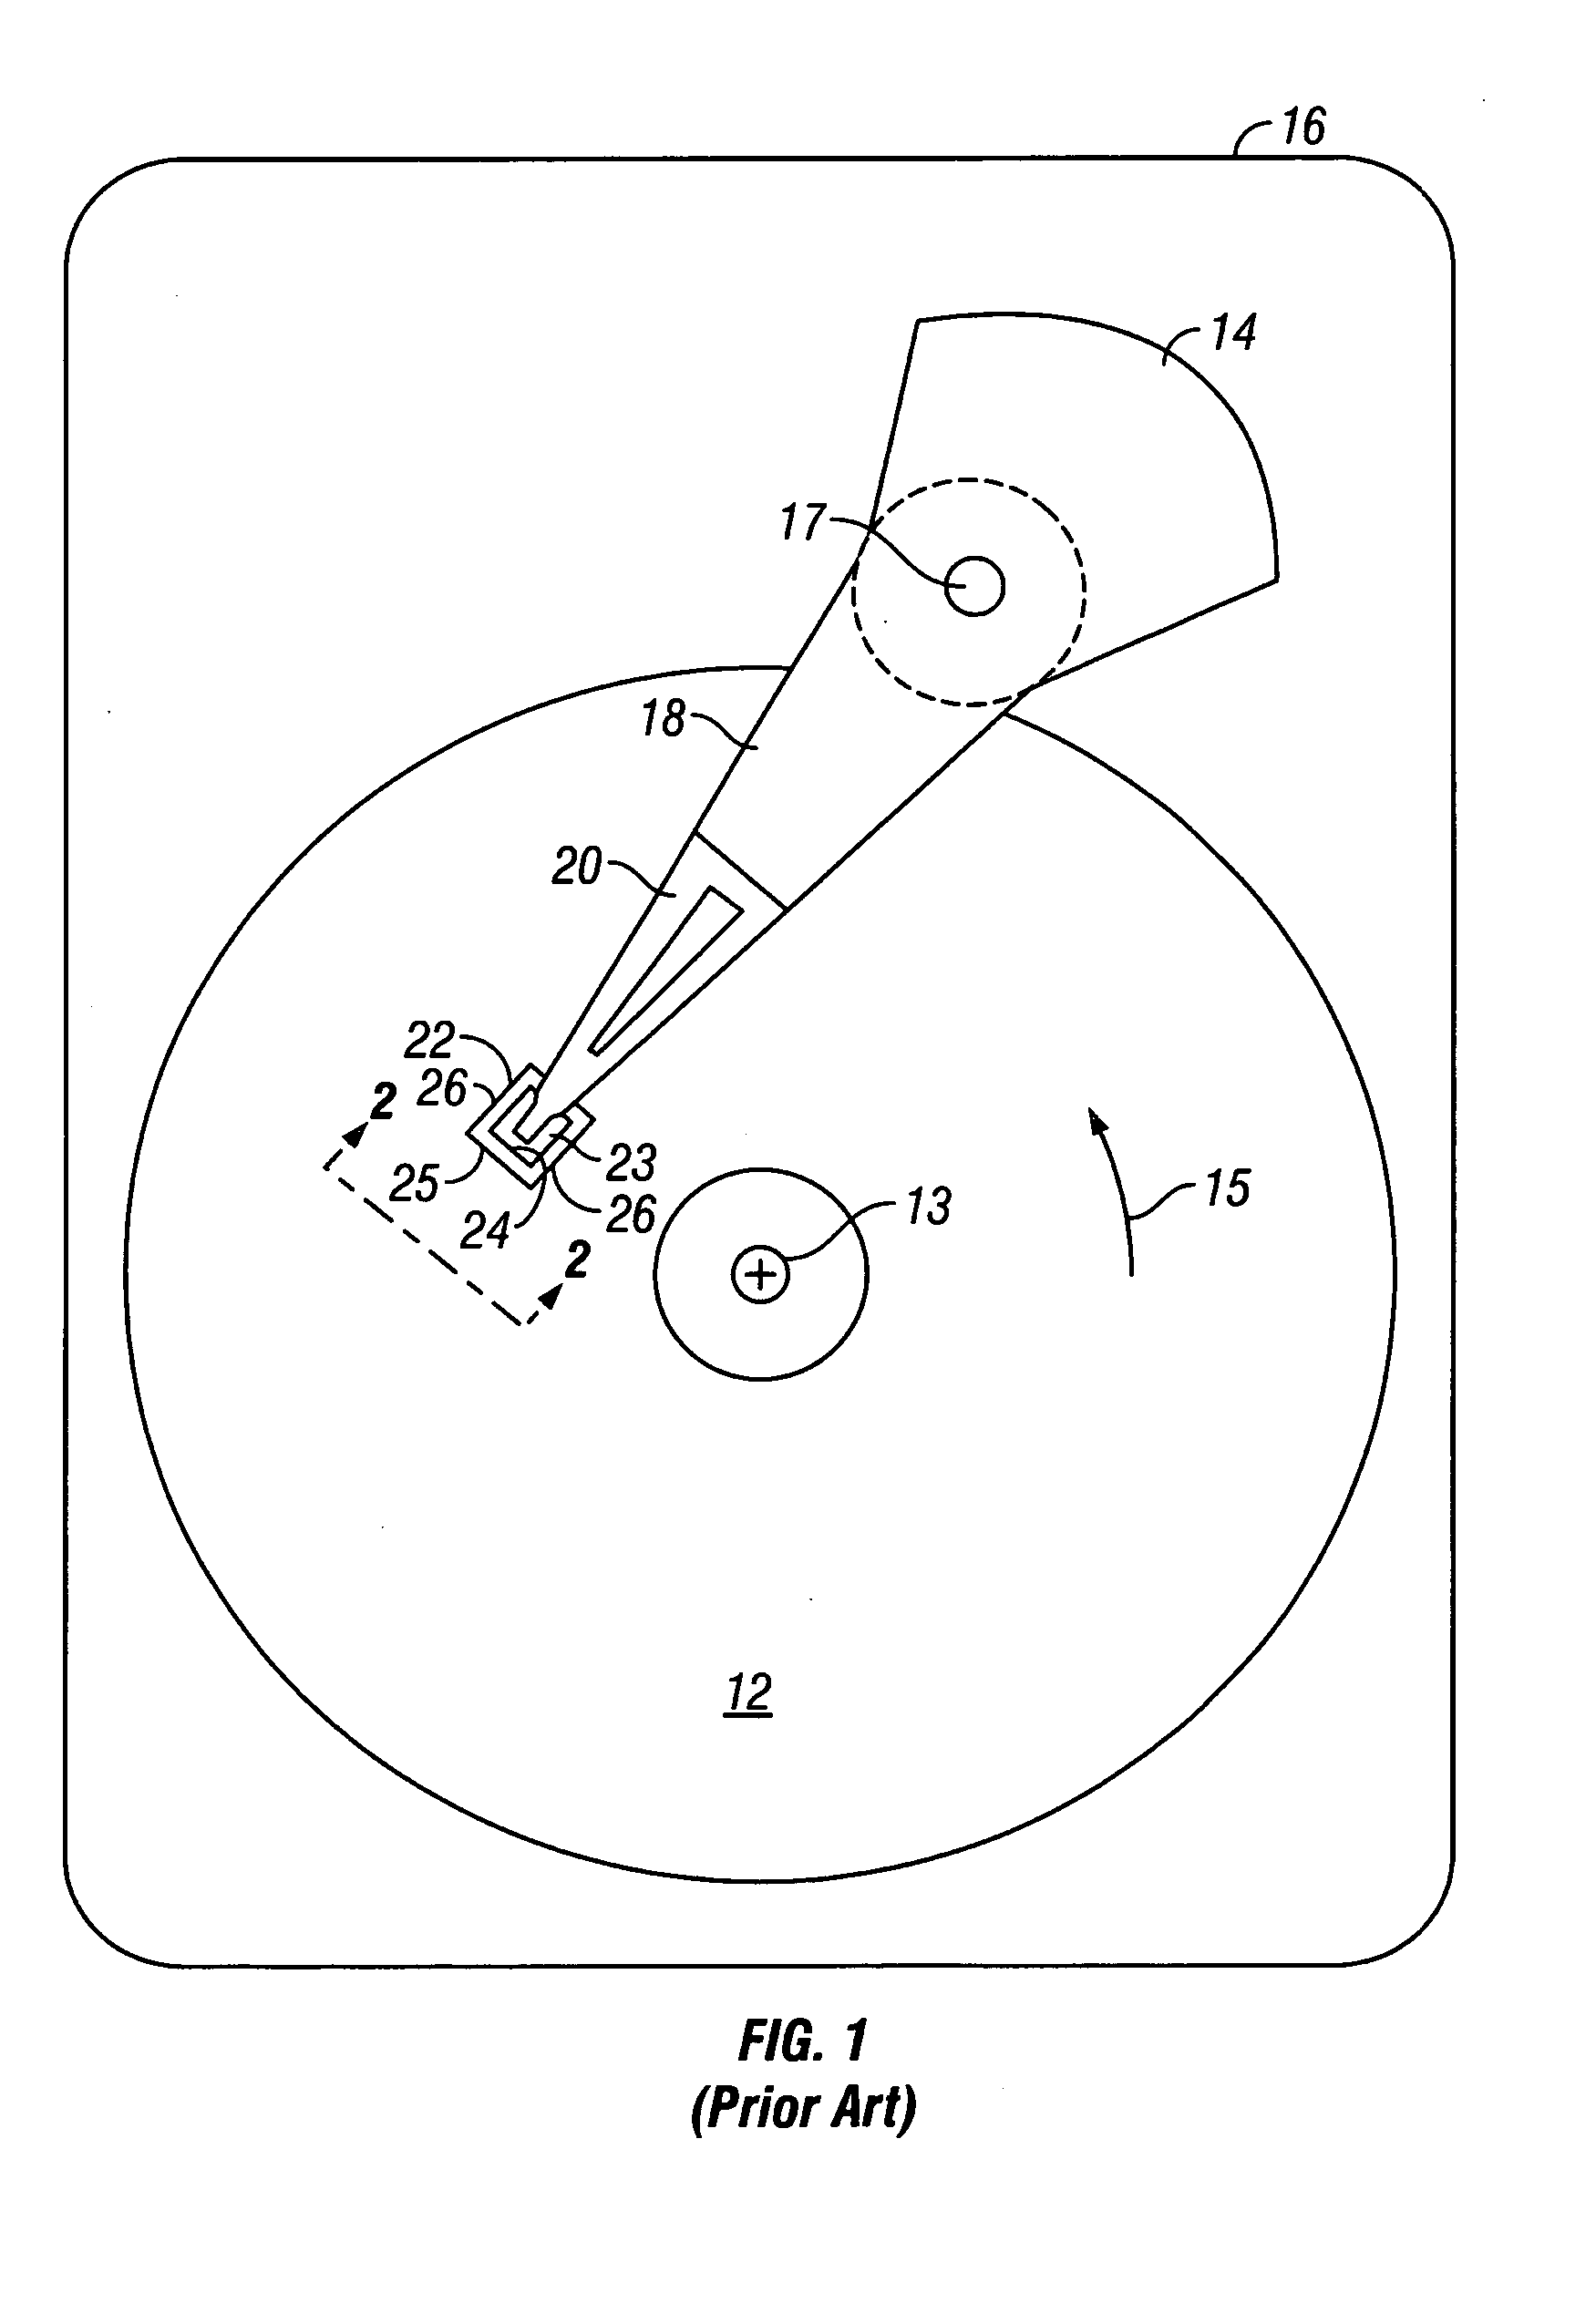 Magnetic recording disk drive having read head with high cross-track resolution and disk with low bit-aspect-ratio